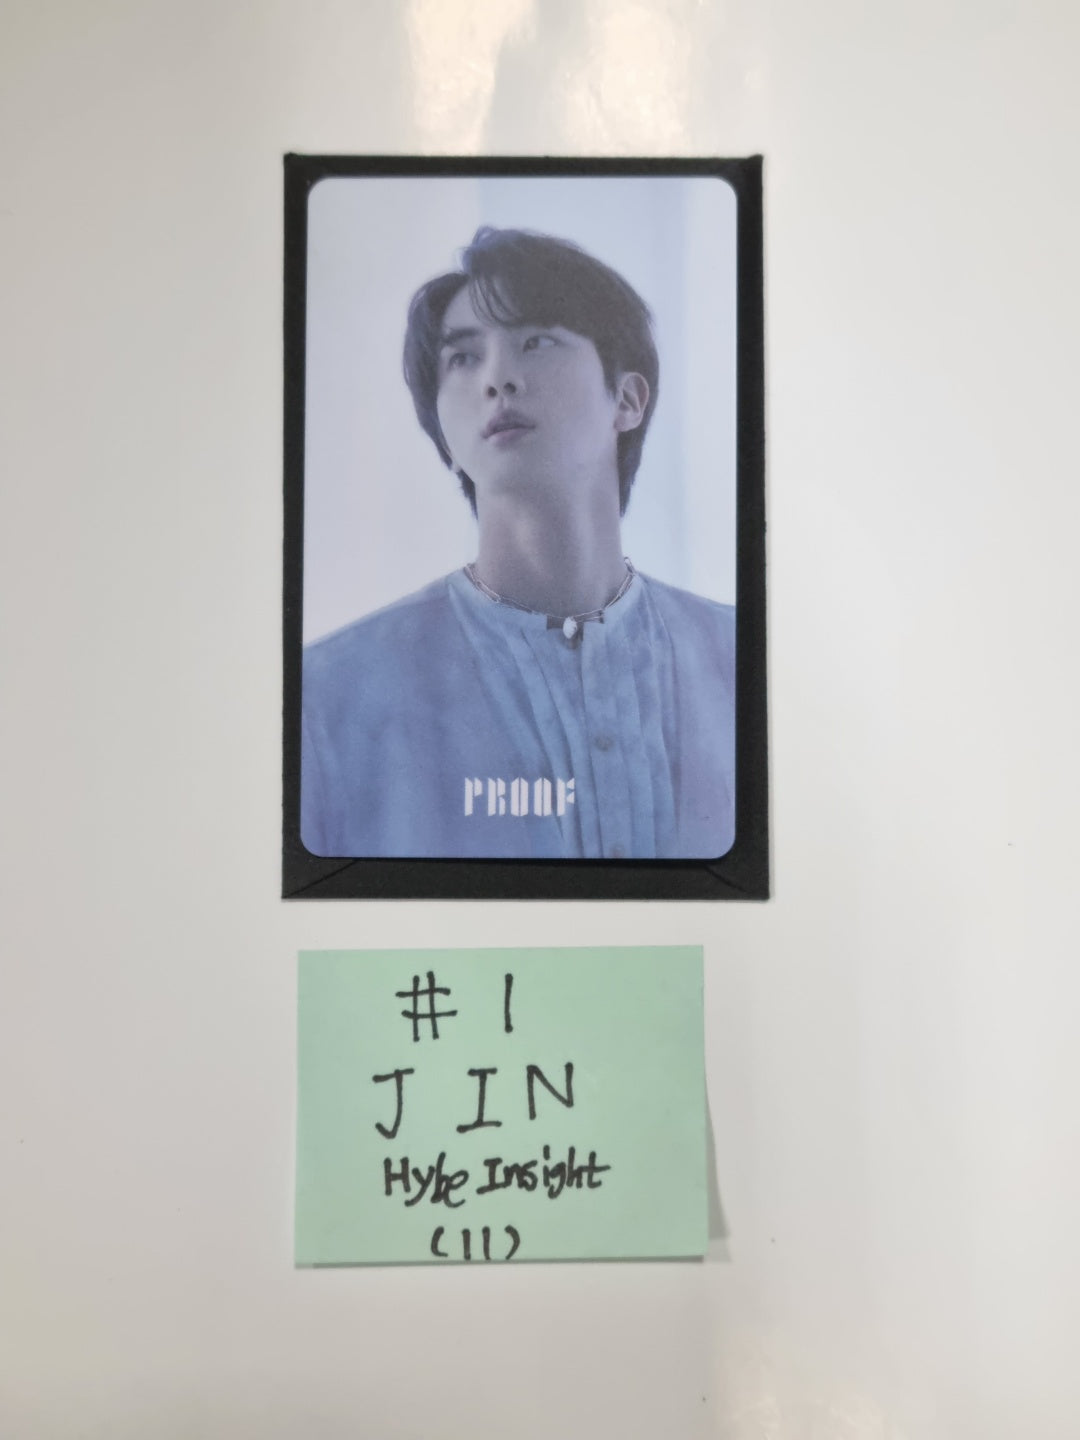 BTS "Proof" - Hybe Insight Event PVC Photocard